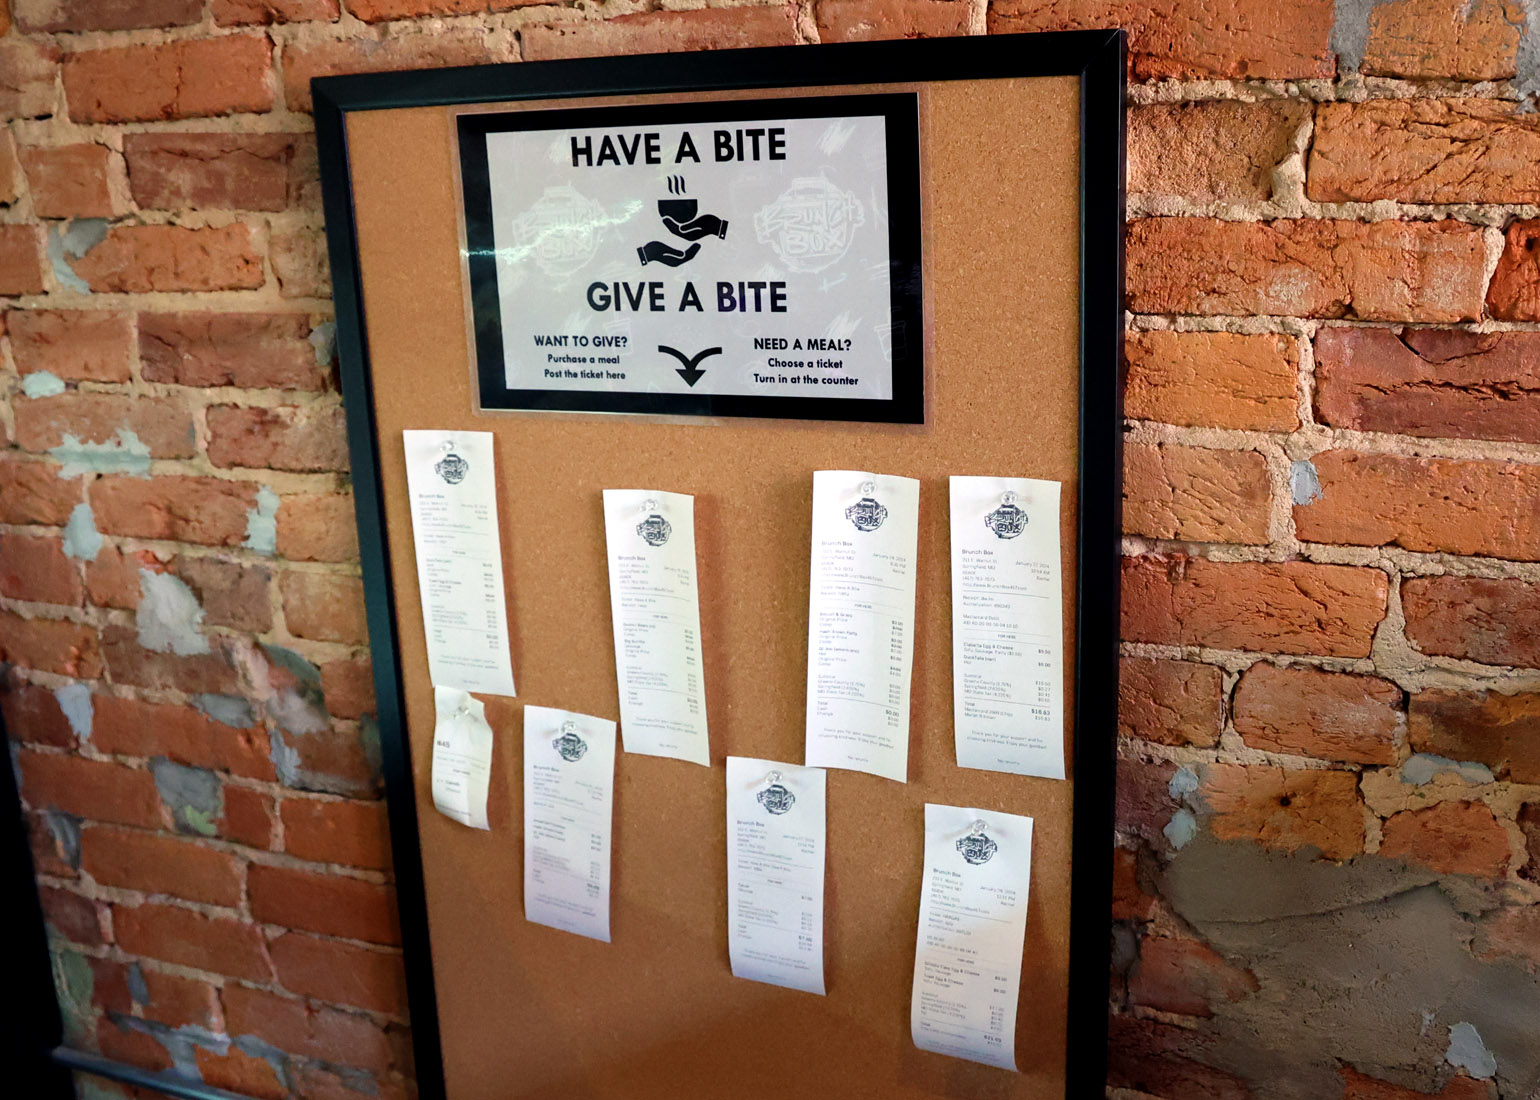 A bulletin board reading "Have A Bite Give A Bite" hangs on a brick wall inside Brunch Box. Receipts are pinned to the board